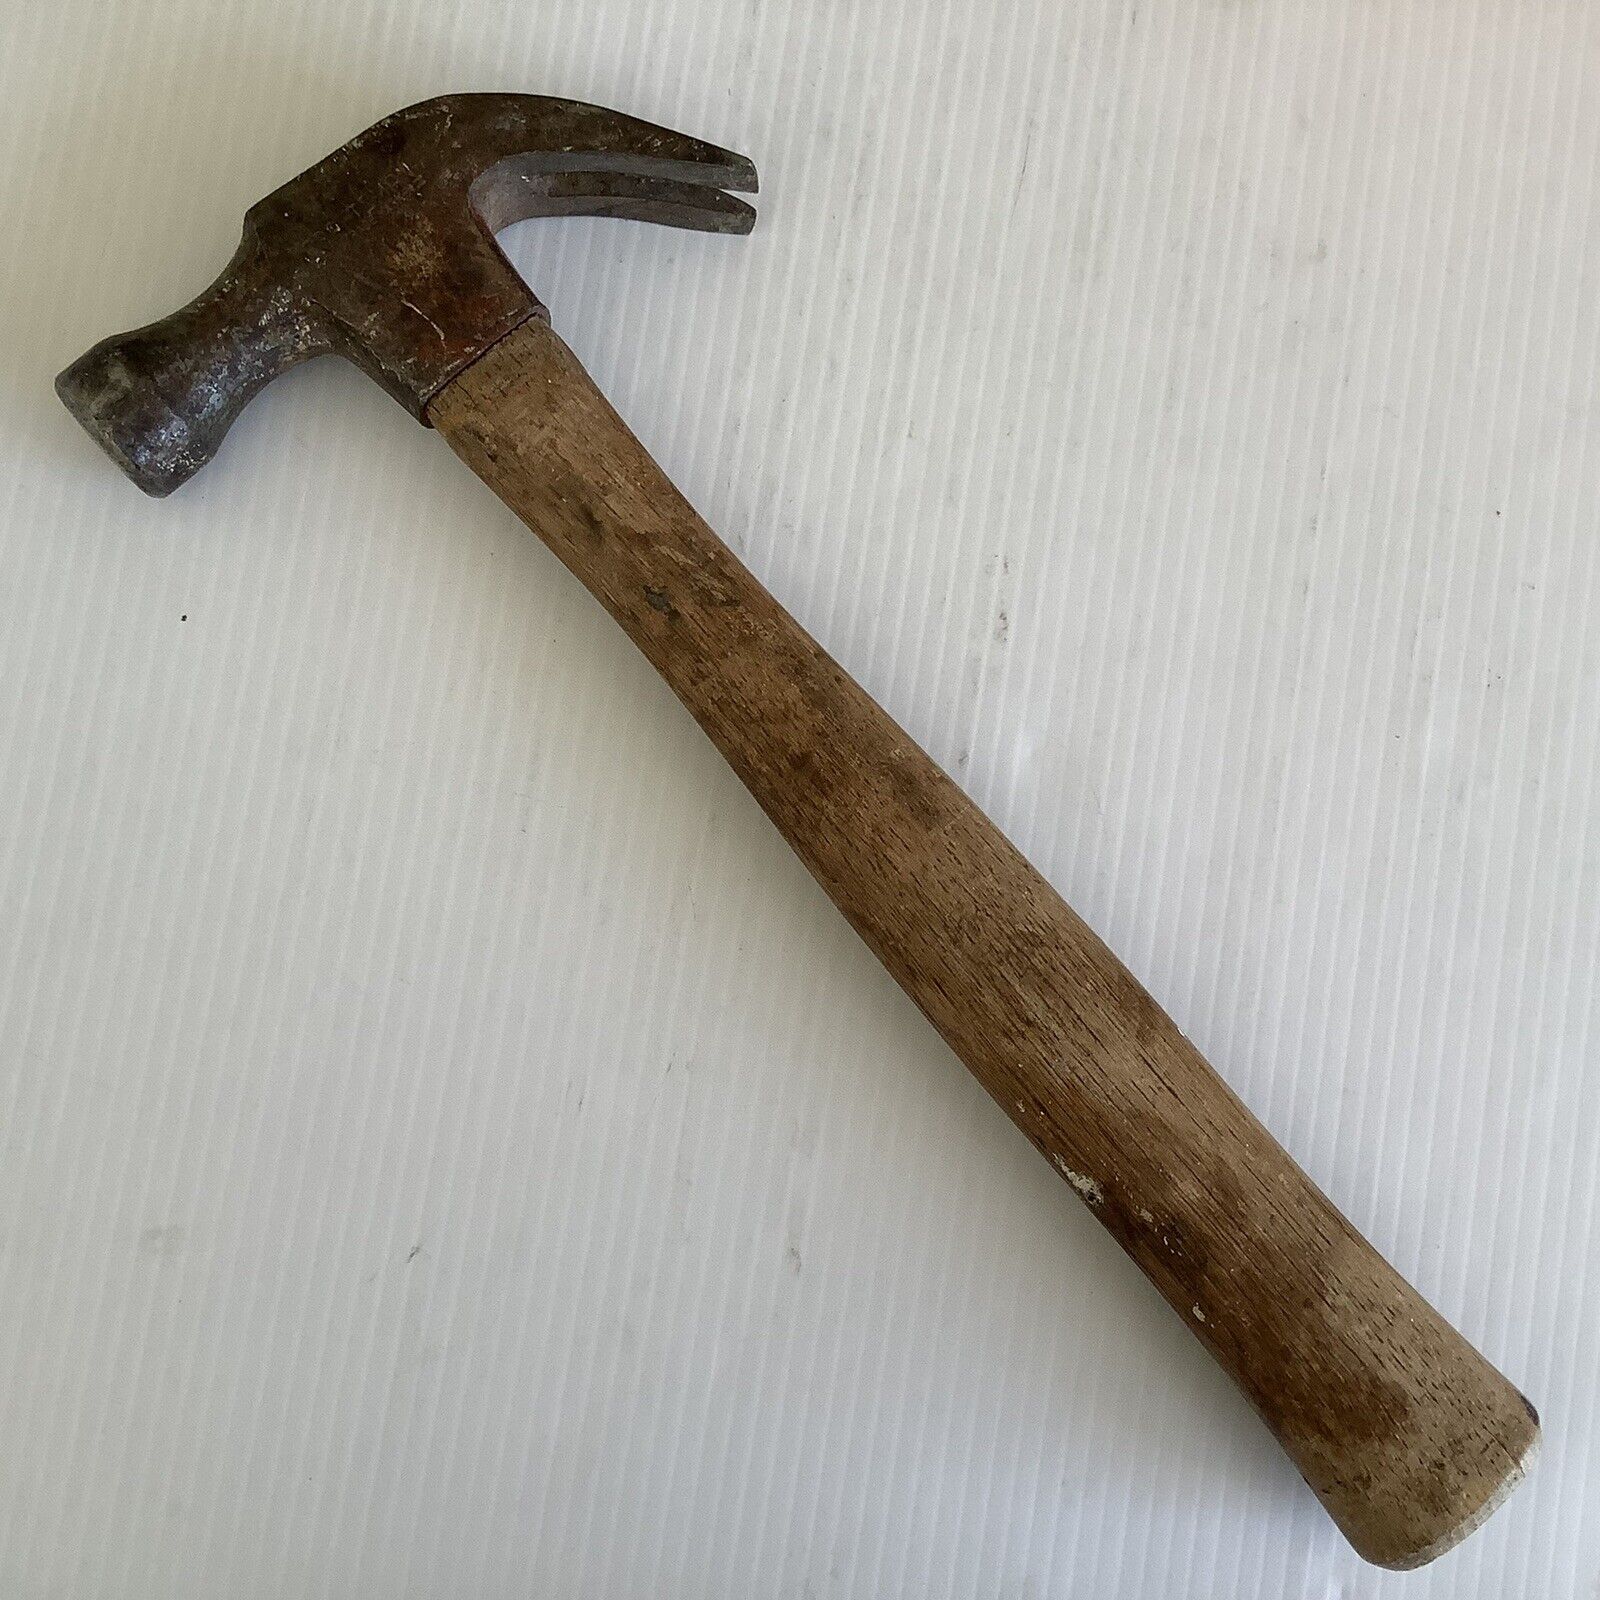 Vintage Craftsman Claw Hammer Great Rare Style 1 Lb 5 oz Total 